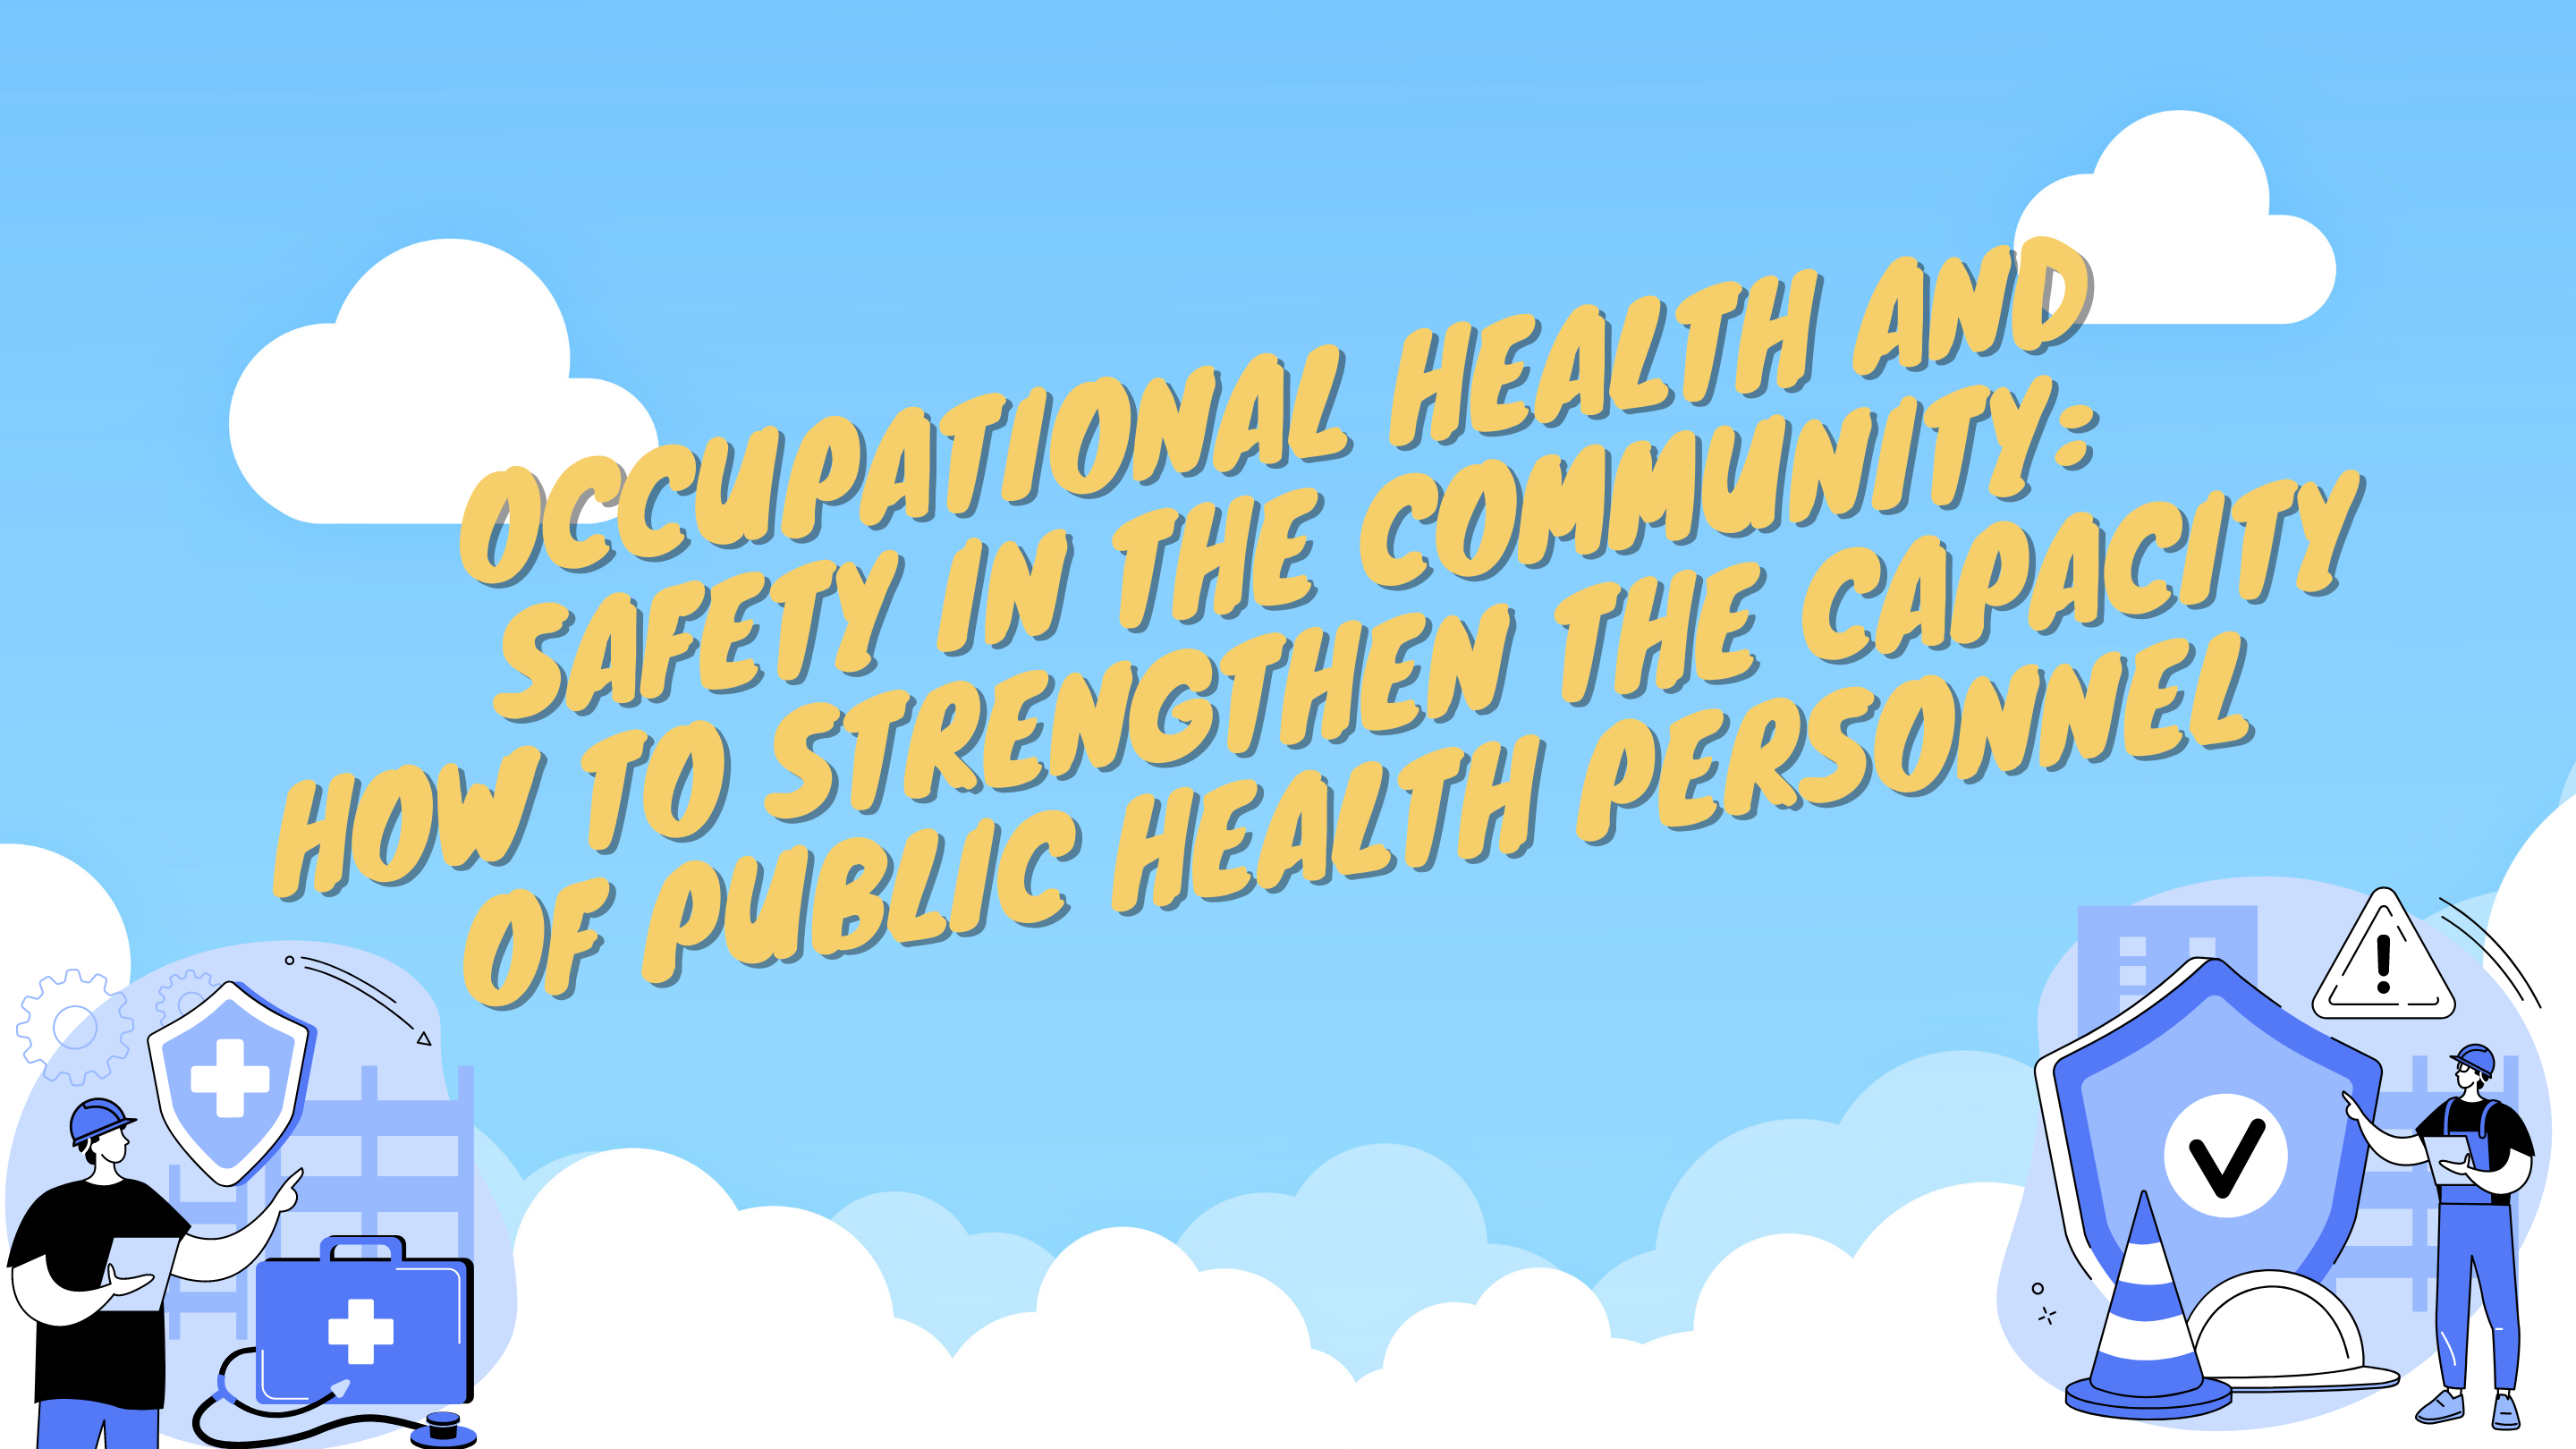 Occupational Health and Safety in the Community: How to Strengthen the Capacity of Public Health Personnel